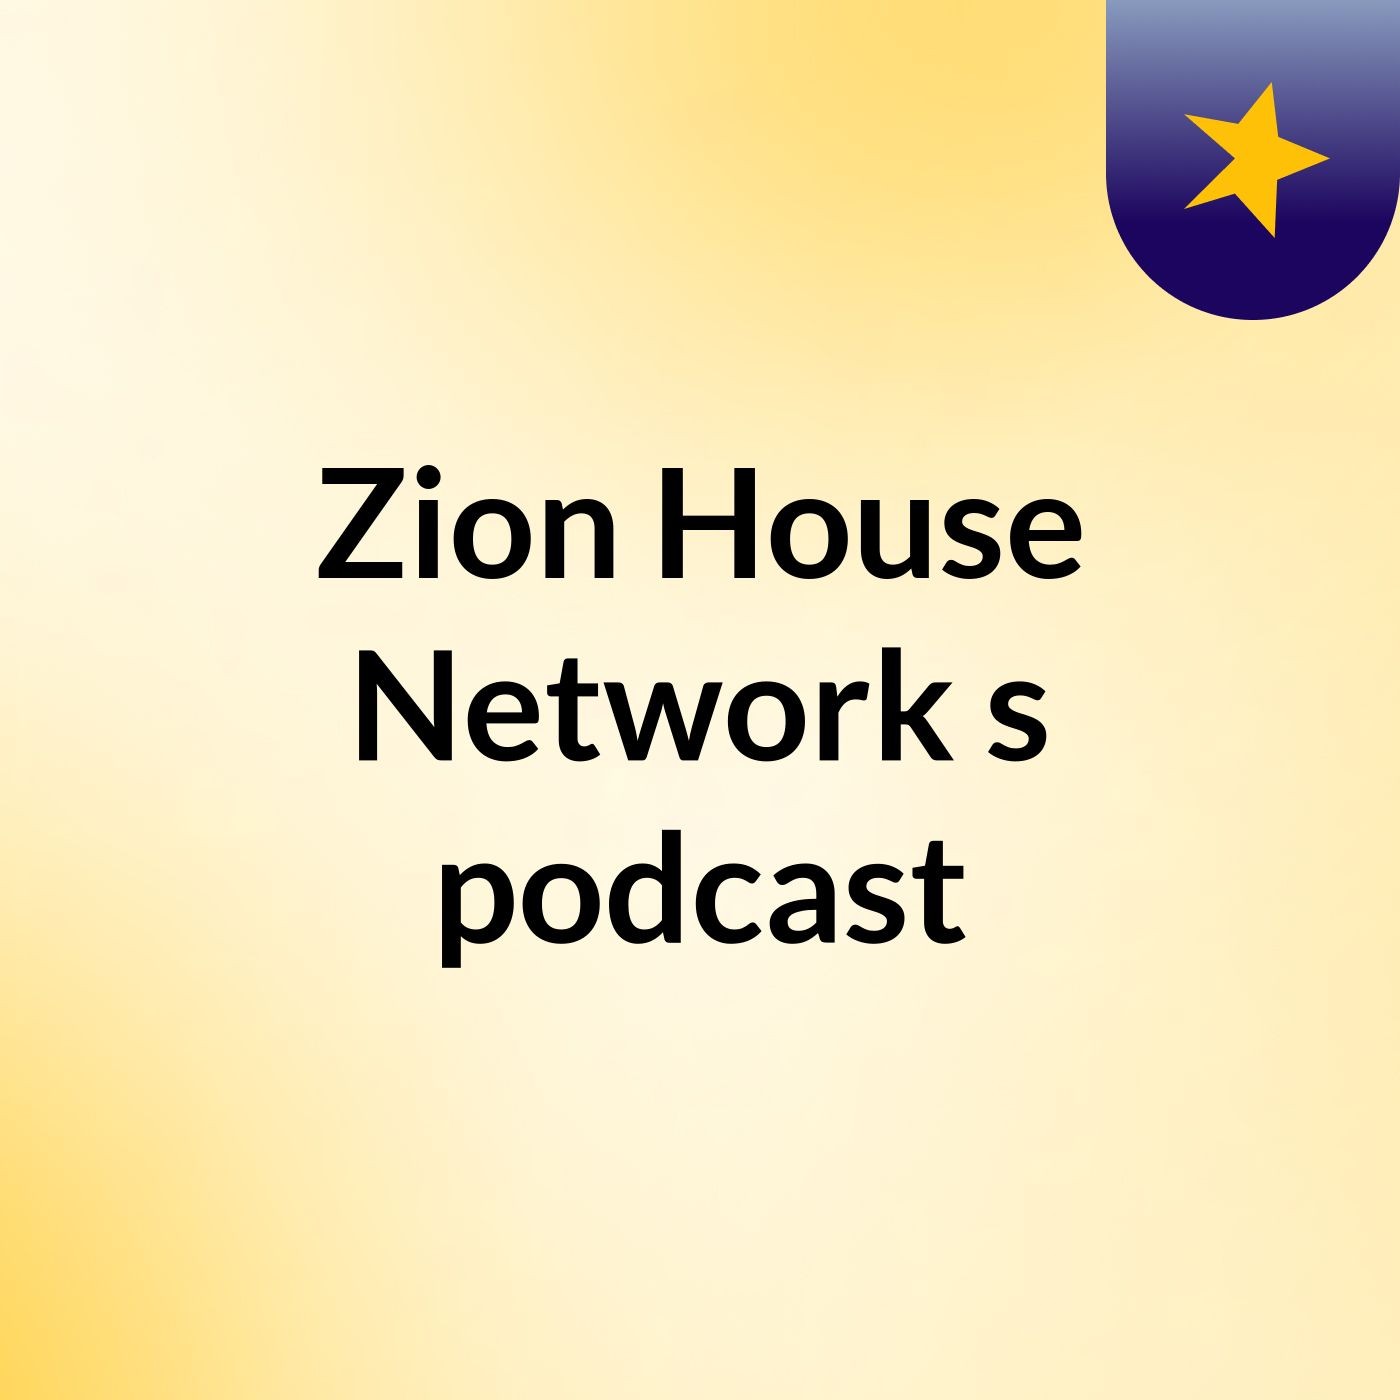 Zion House Network's podcast